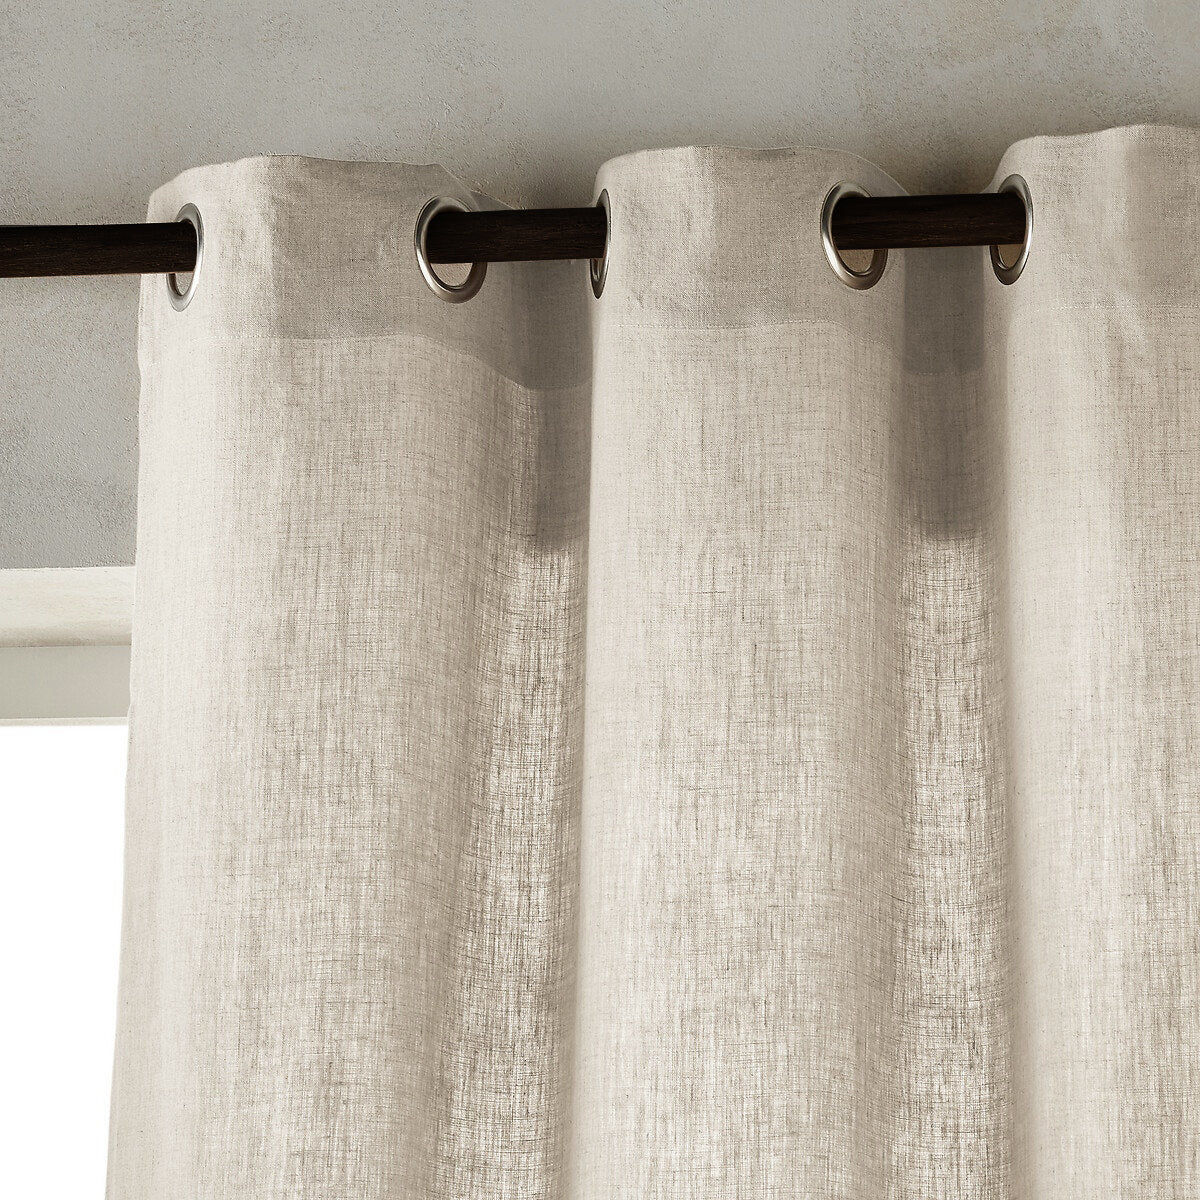 Amore Beaute Curtain Crafted from high quality linen fabric and metal grommets will bring modern and industrial style to your room décor.